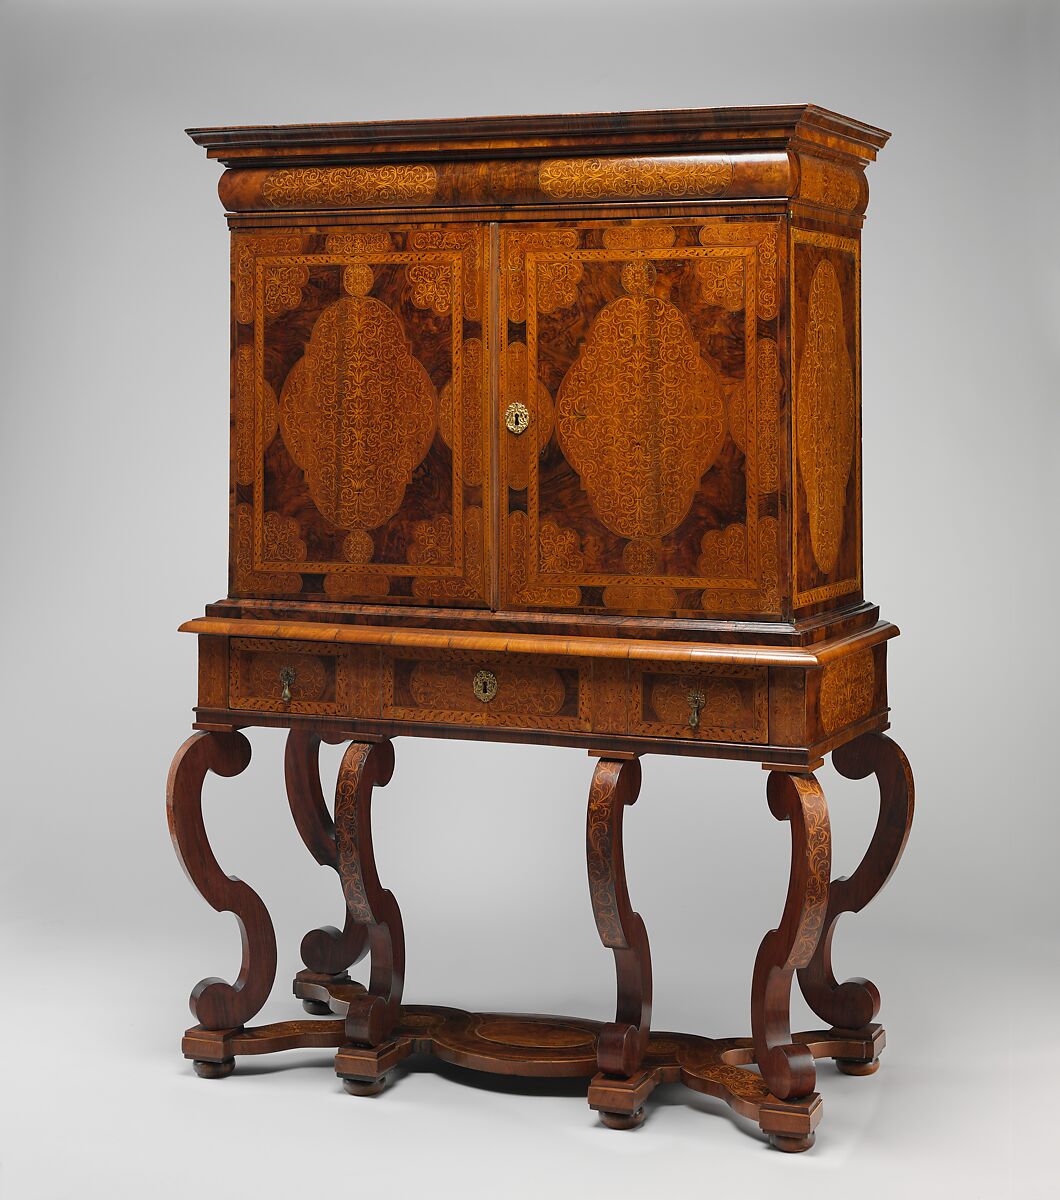 Cabinet on stand, Pine veneered with marquetry of walnut, burl walnut, holly; oak drawers; walnut legs; brass hardware, some of it replaced, British 